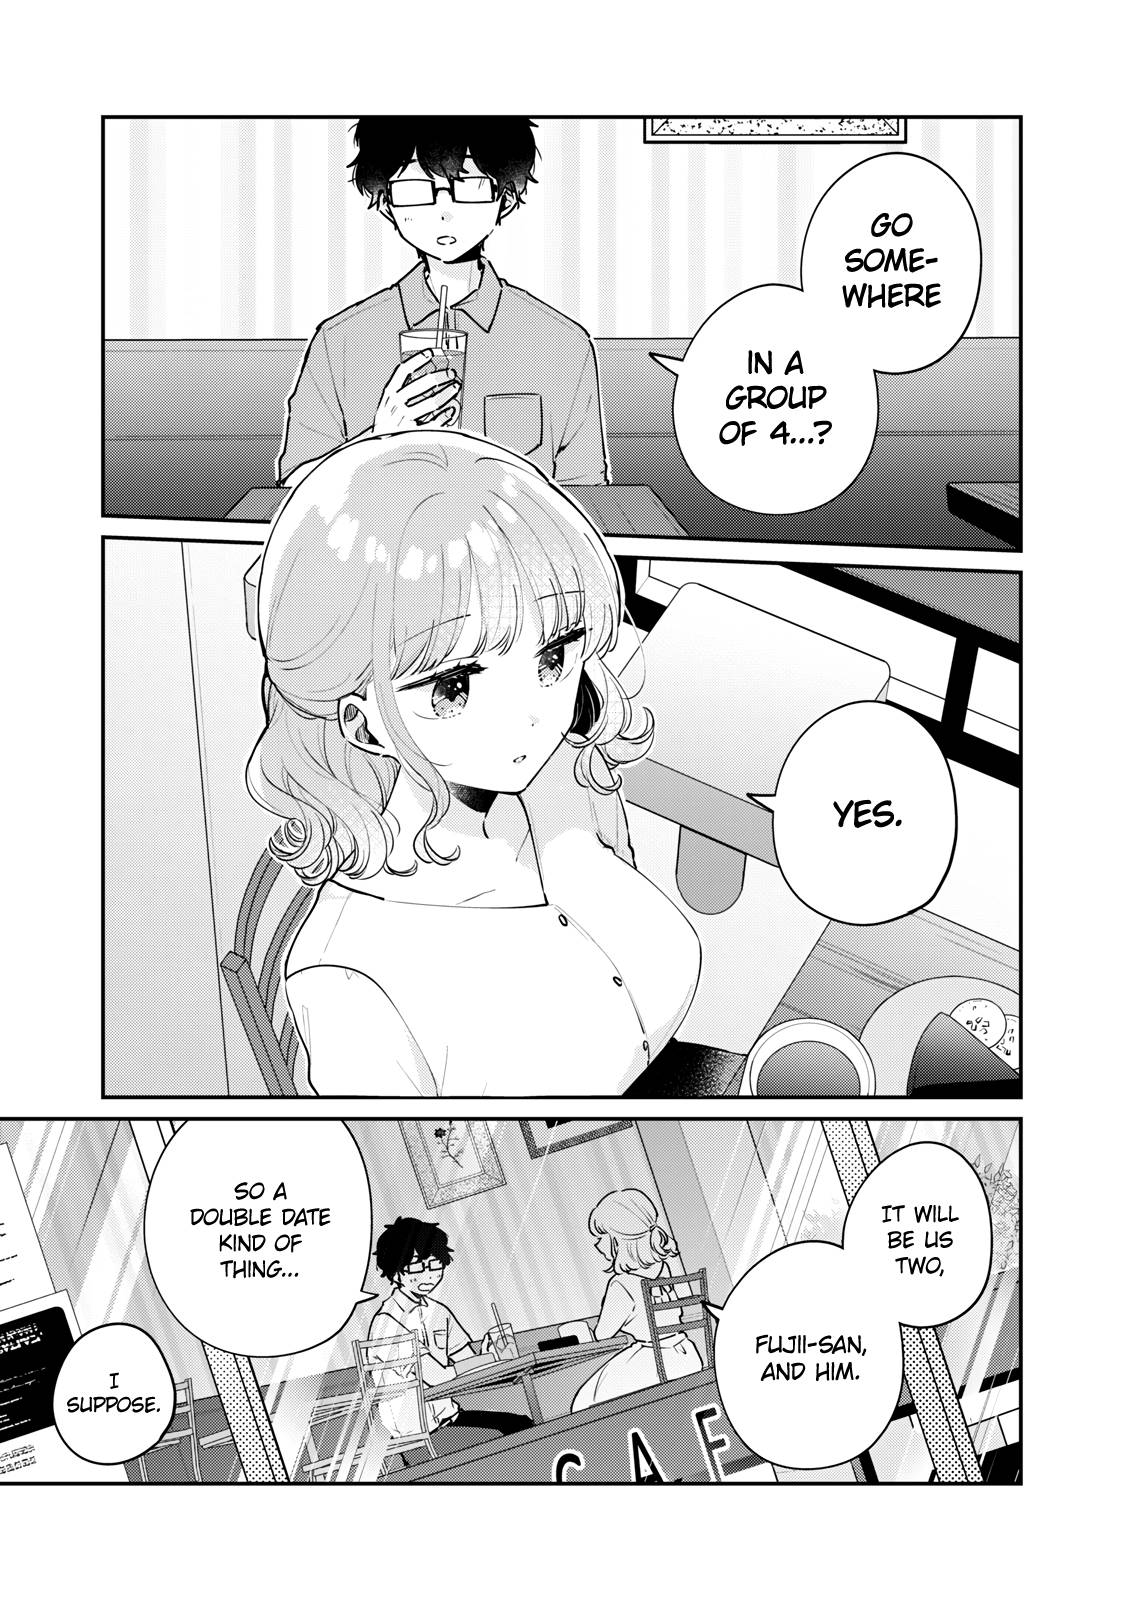 It's Not Meguro-san's First Time chapter 61 page 2